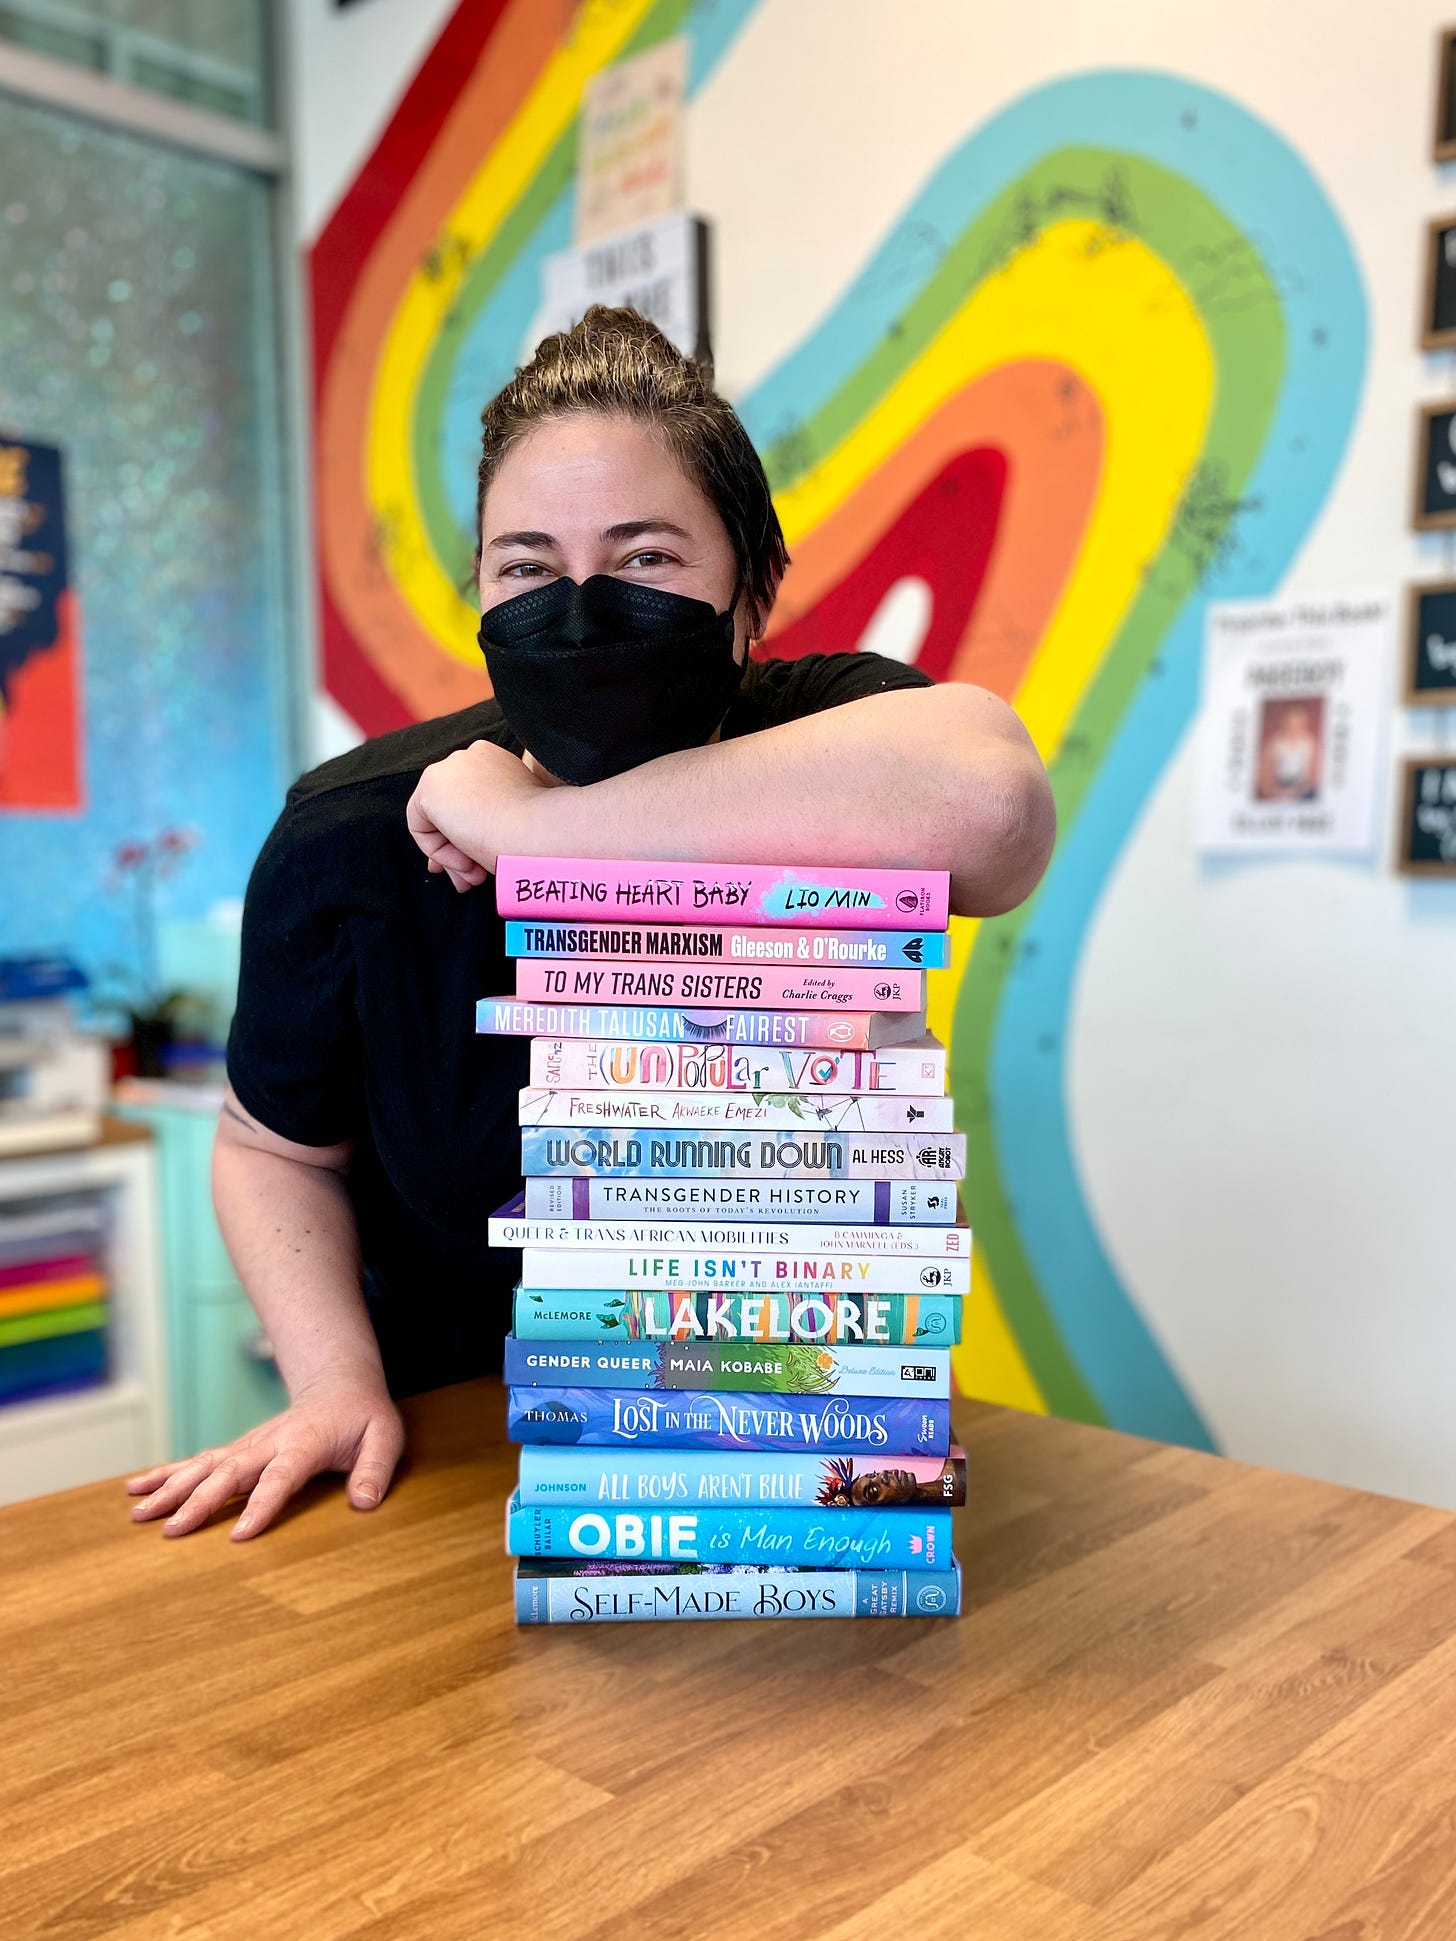 Kaitlyn, bookstore owner and white agender person, leans over a tall stack of queer books on a wood table. They are smiling behind a black mask and wearing a black t-shirt. In the background is a rainbow painted wall.